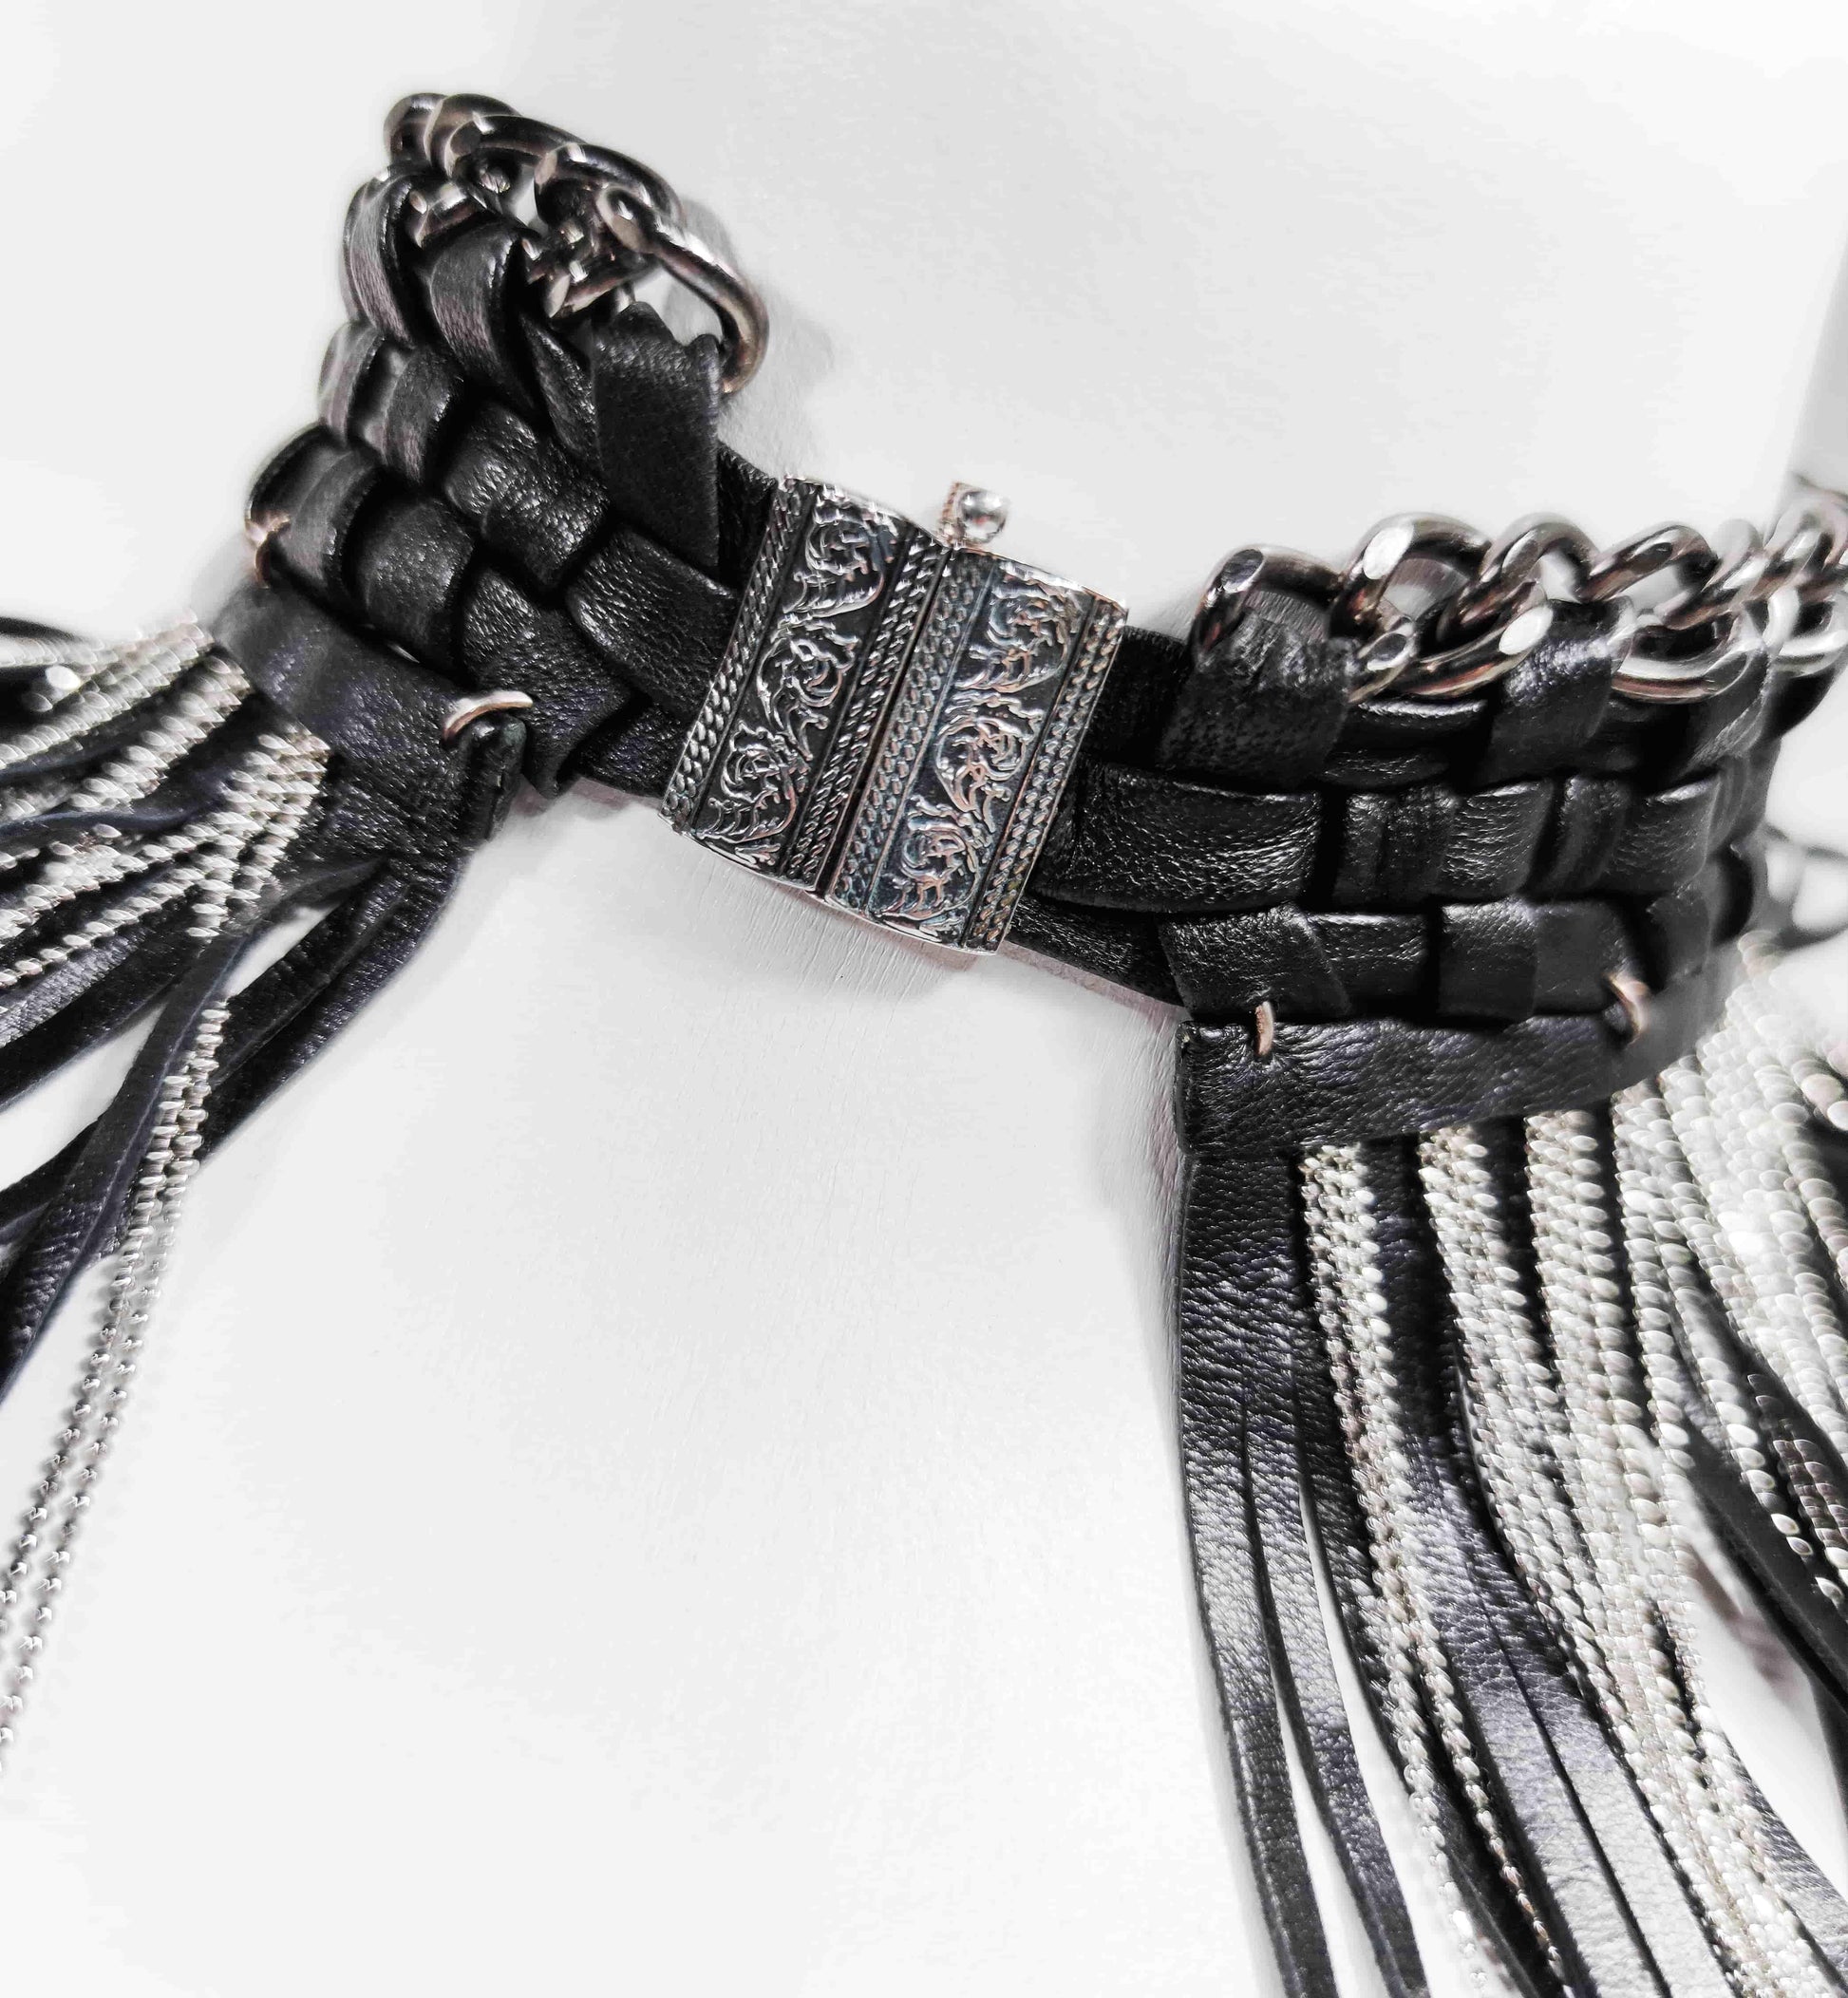 Exquisite detail of Axinia Long Braided Leather Chocker with Leather Fringe and Chains showcasing the fine craftsmanship and elegant design characteristic of Axinia Collection 's luxury collection.